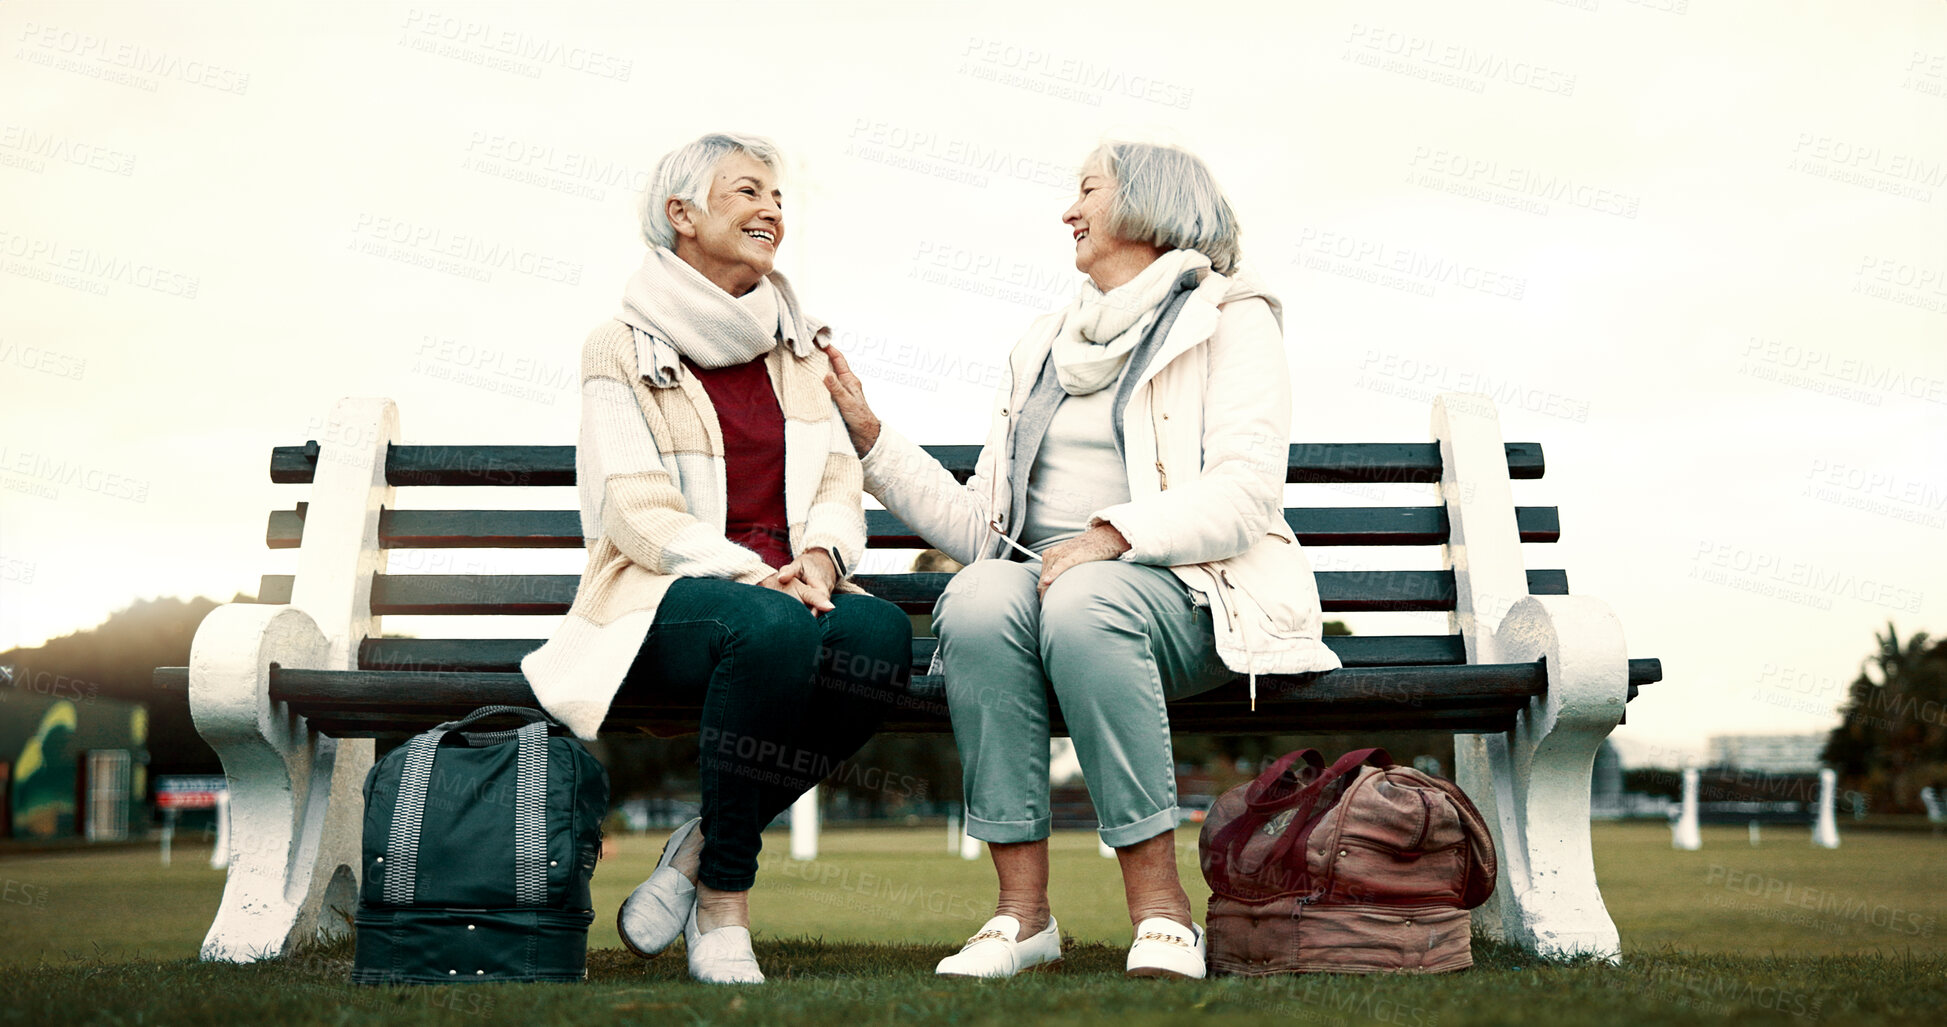 Buy stock photo Women, bench or old people talking in park or nature speaking or bonding together in retirement outdoors. Senior, elderly or mature woman in conversation to relax with peace or care on holiday break